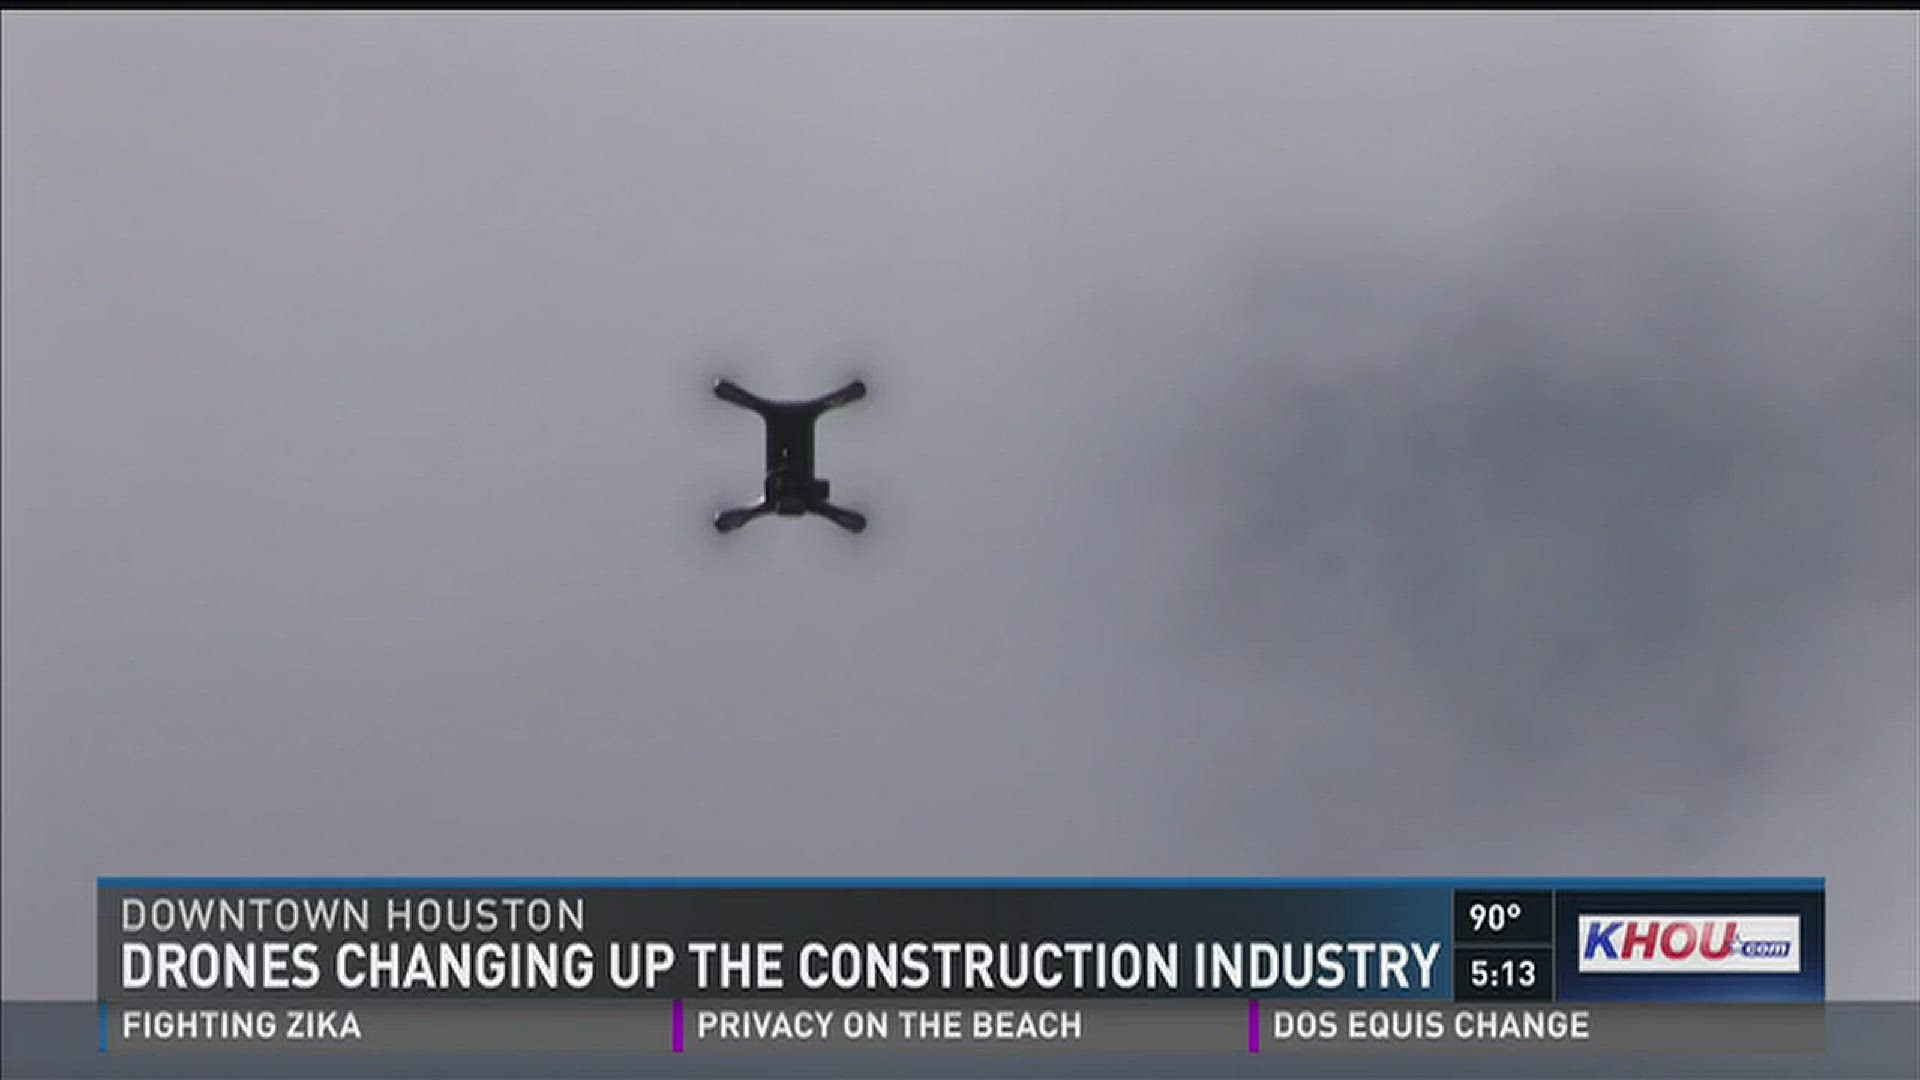 New FAA regulations announced last week has led to construction workers using drones in downtown Houston. The drones are being used to take photos of construction sites in high definition quality. Construction managers say the drones are beneficial at the